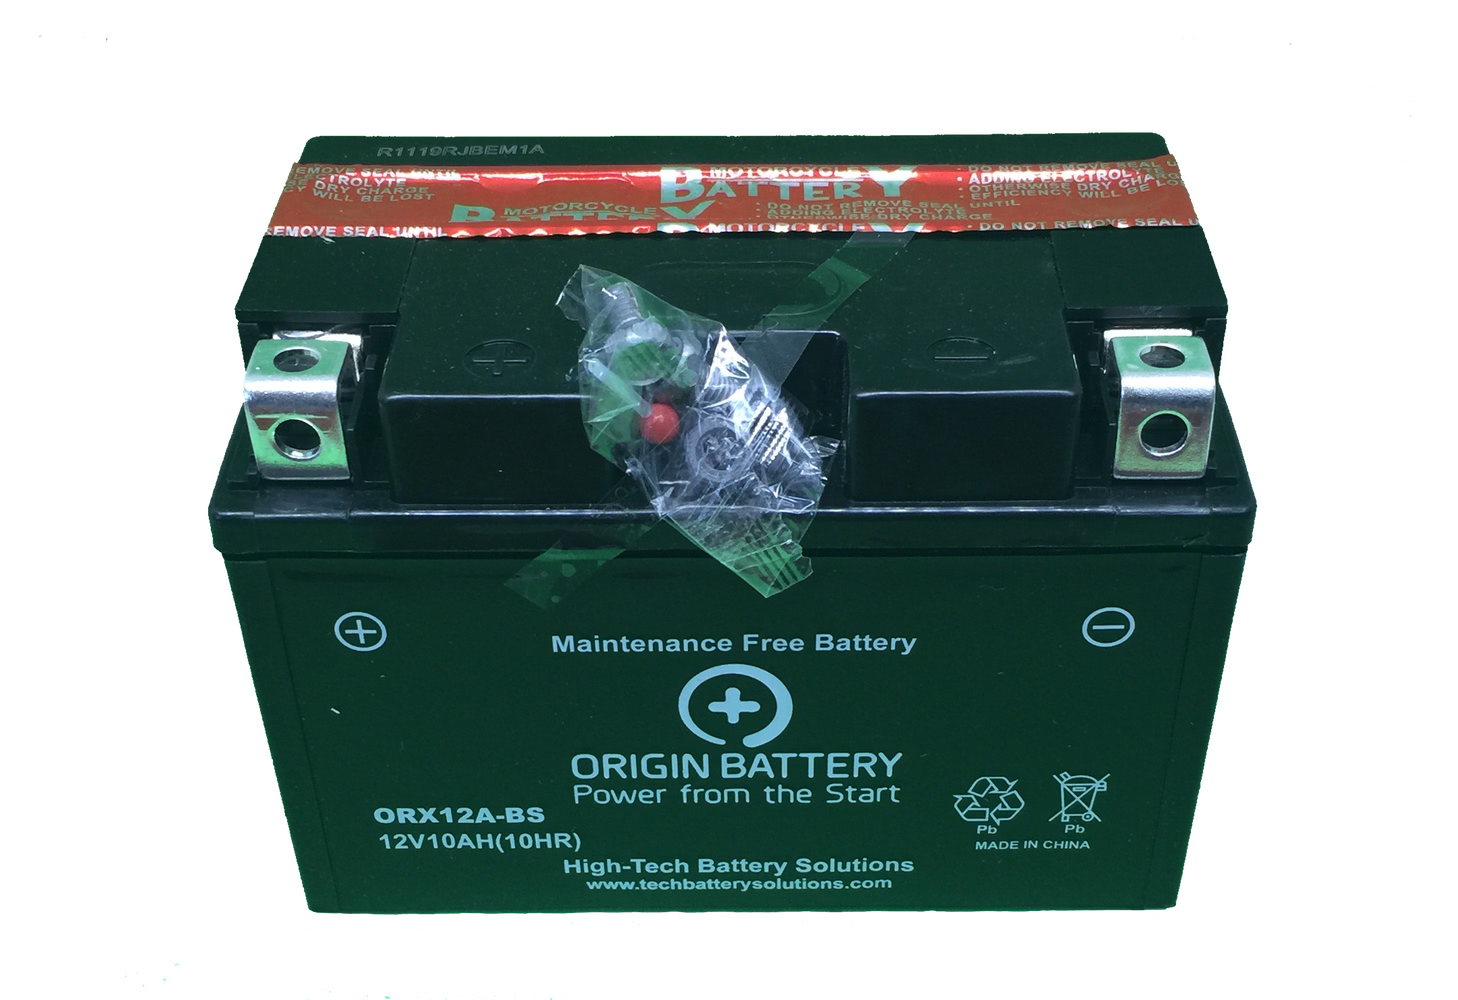 Is the battery at the Suzuki GSX S750 battery location charged and ready for use?